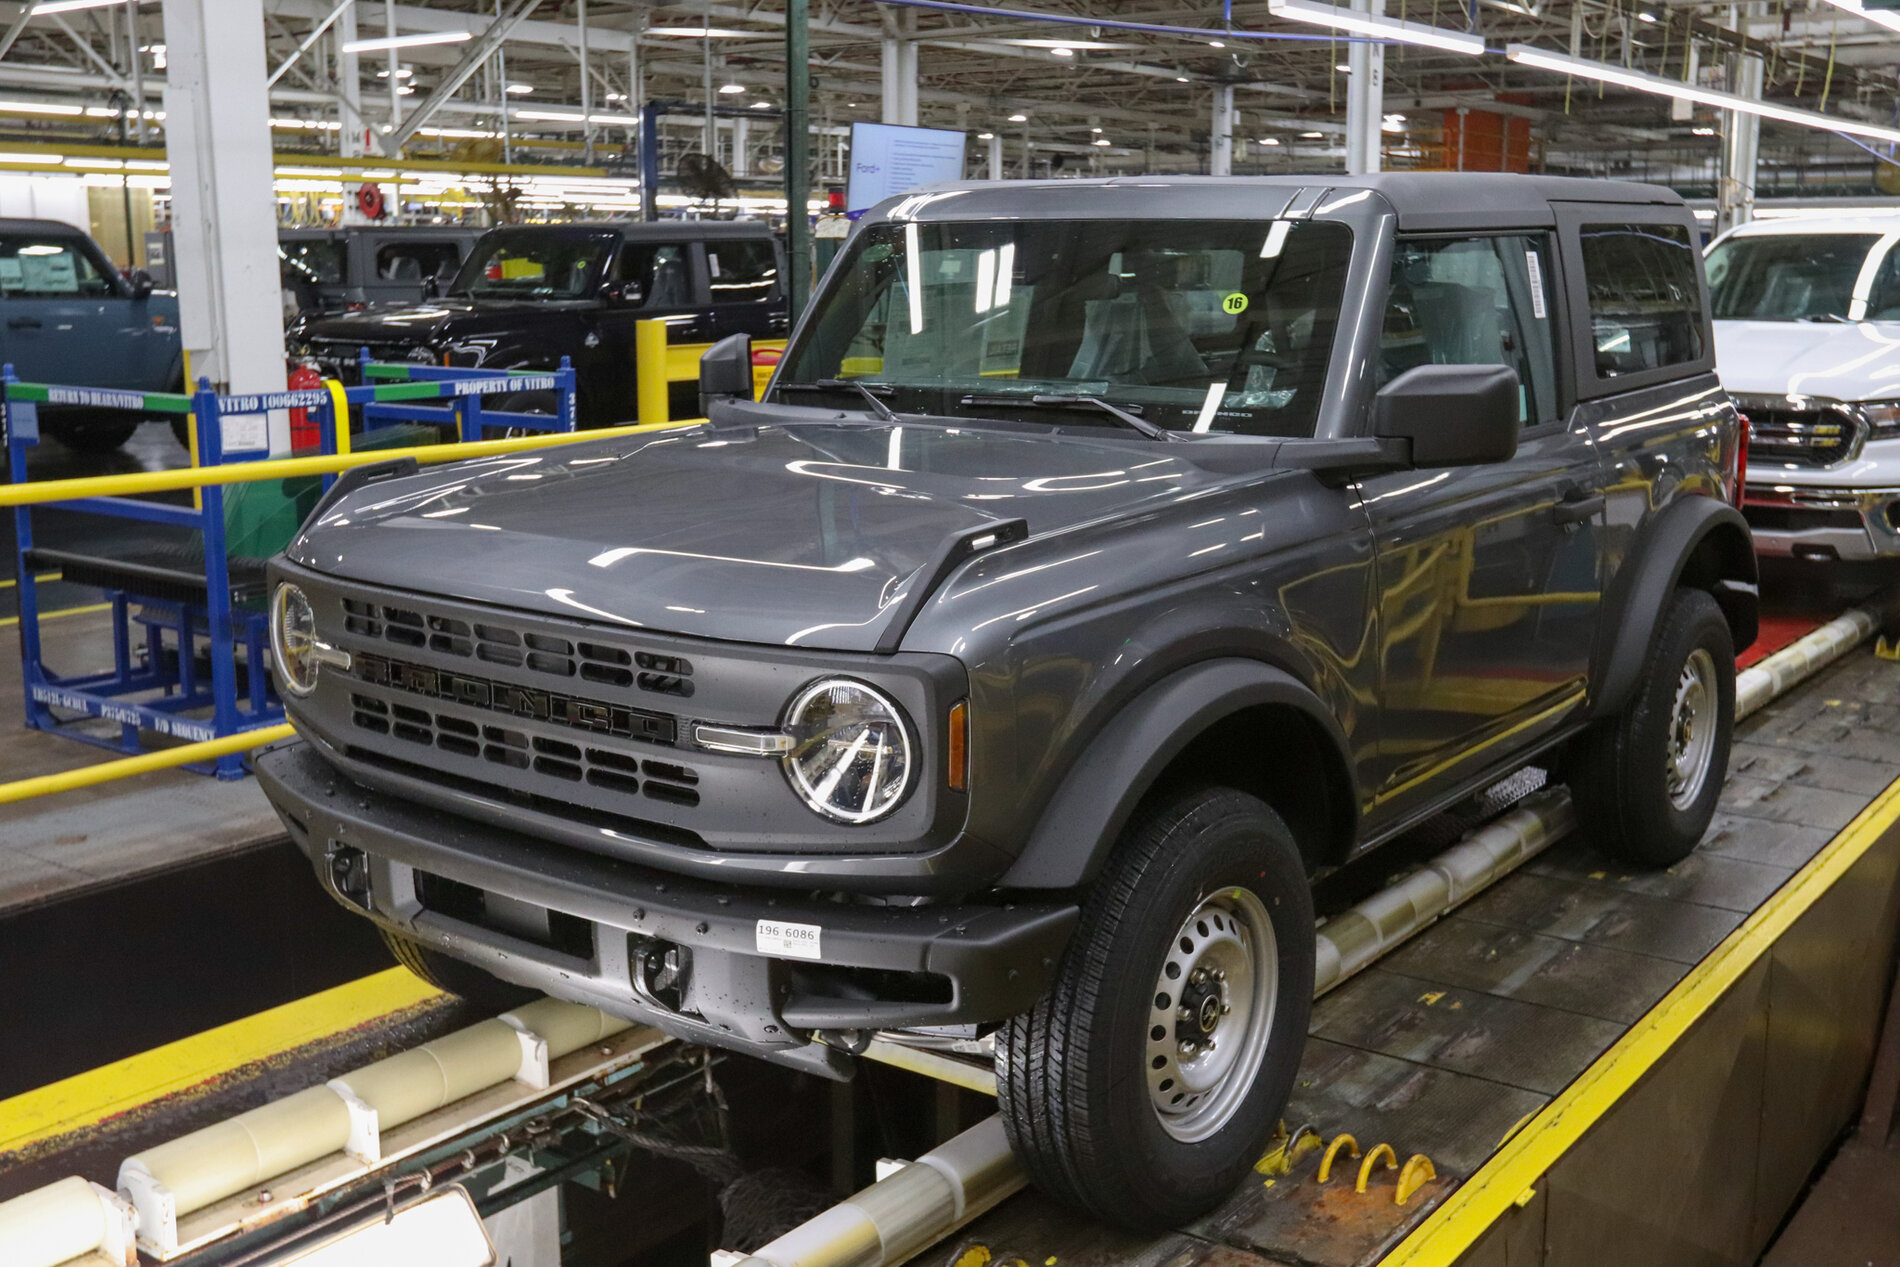 Ford Bronco Post Your Bronco Production Line Pics! (From Ford Emails Starting Today) 808A9579-F778-47FC-9878-3754DD6F408C